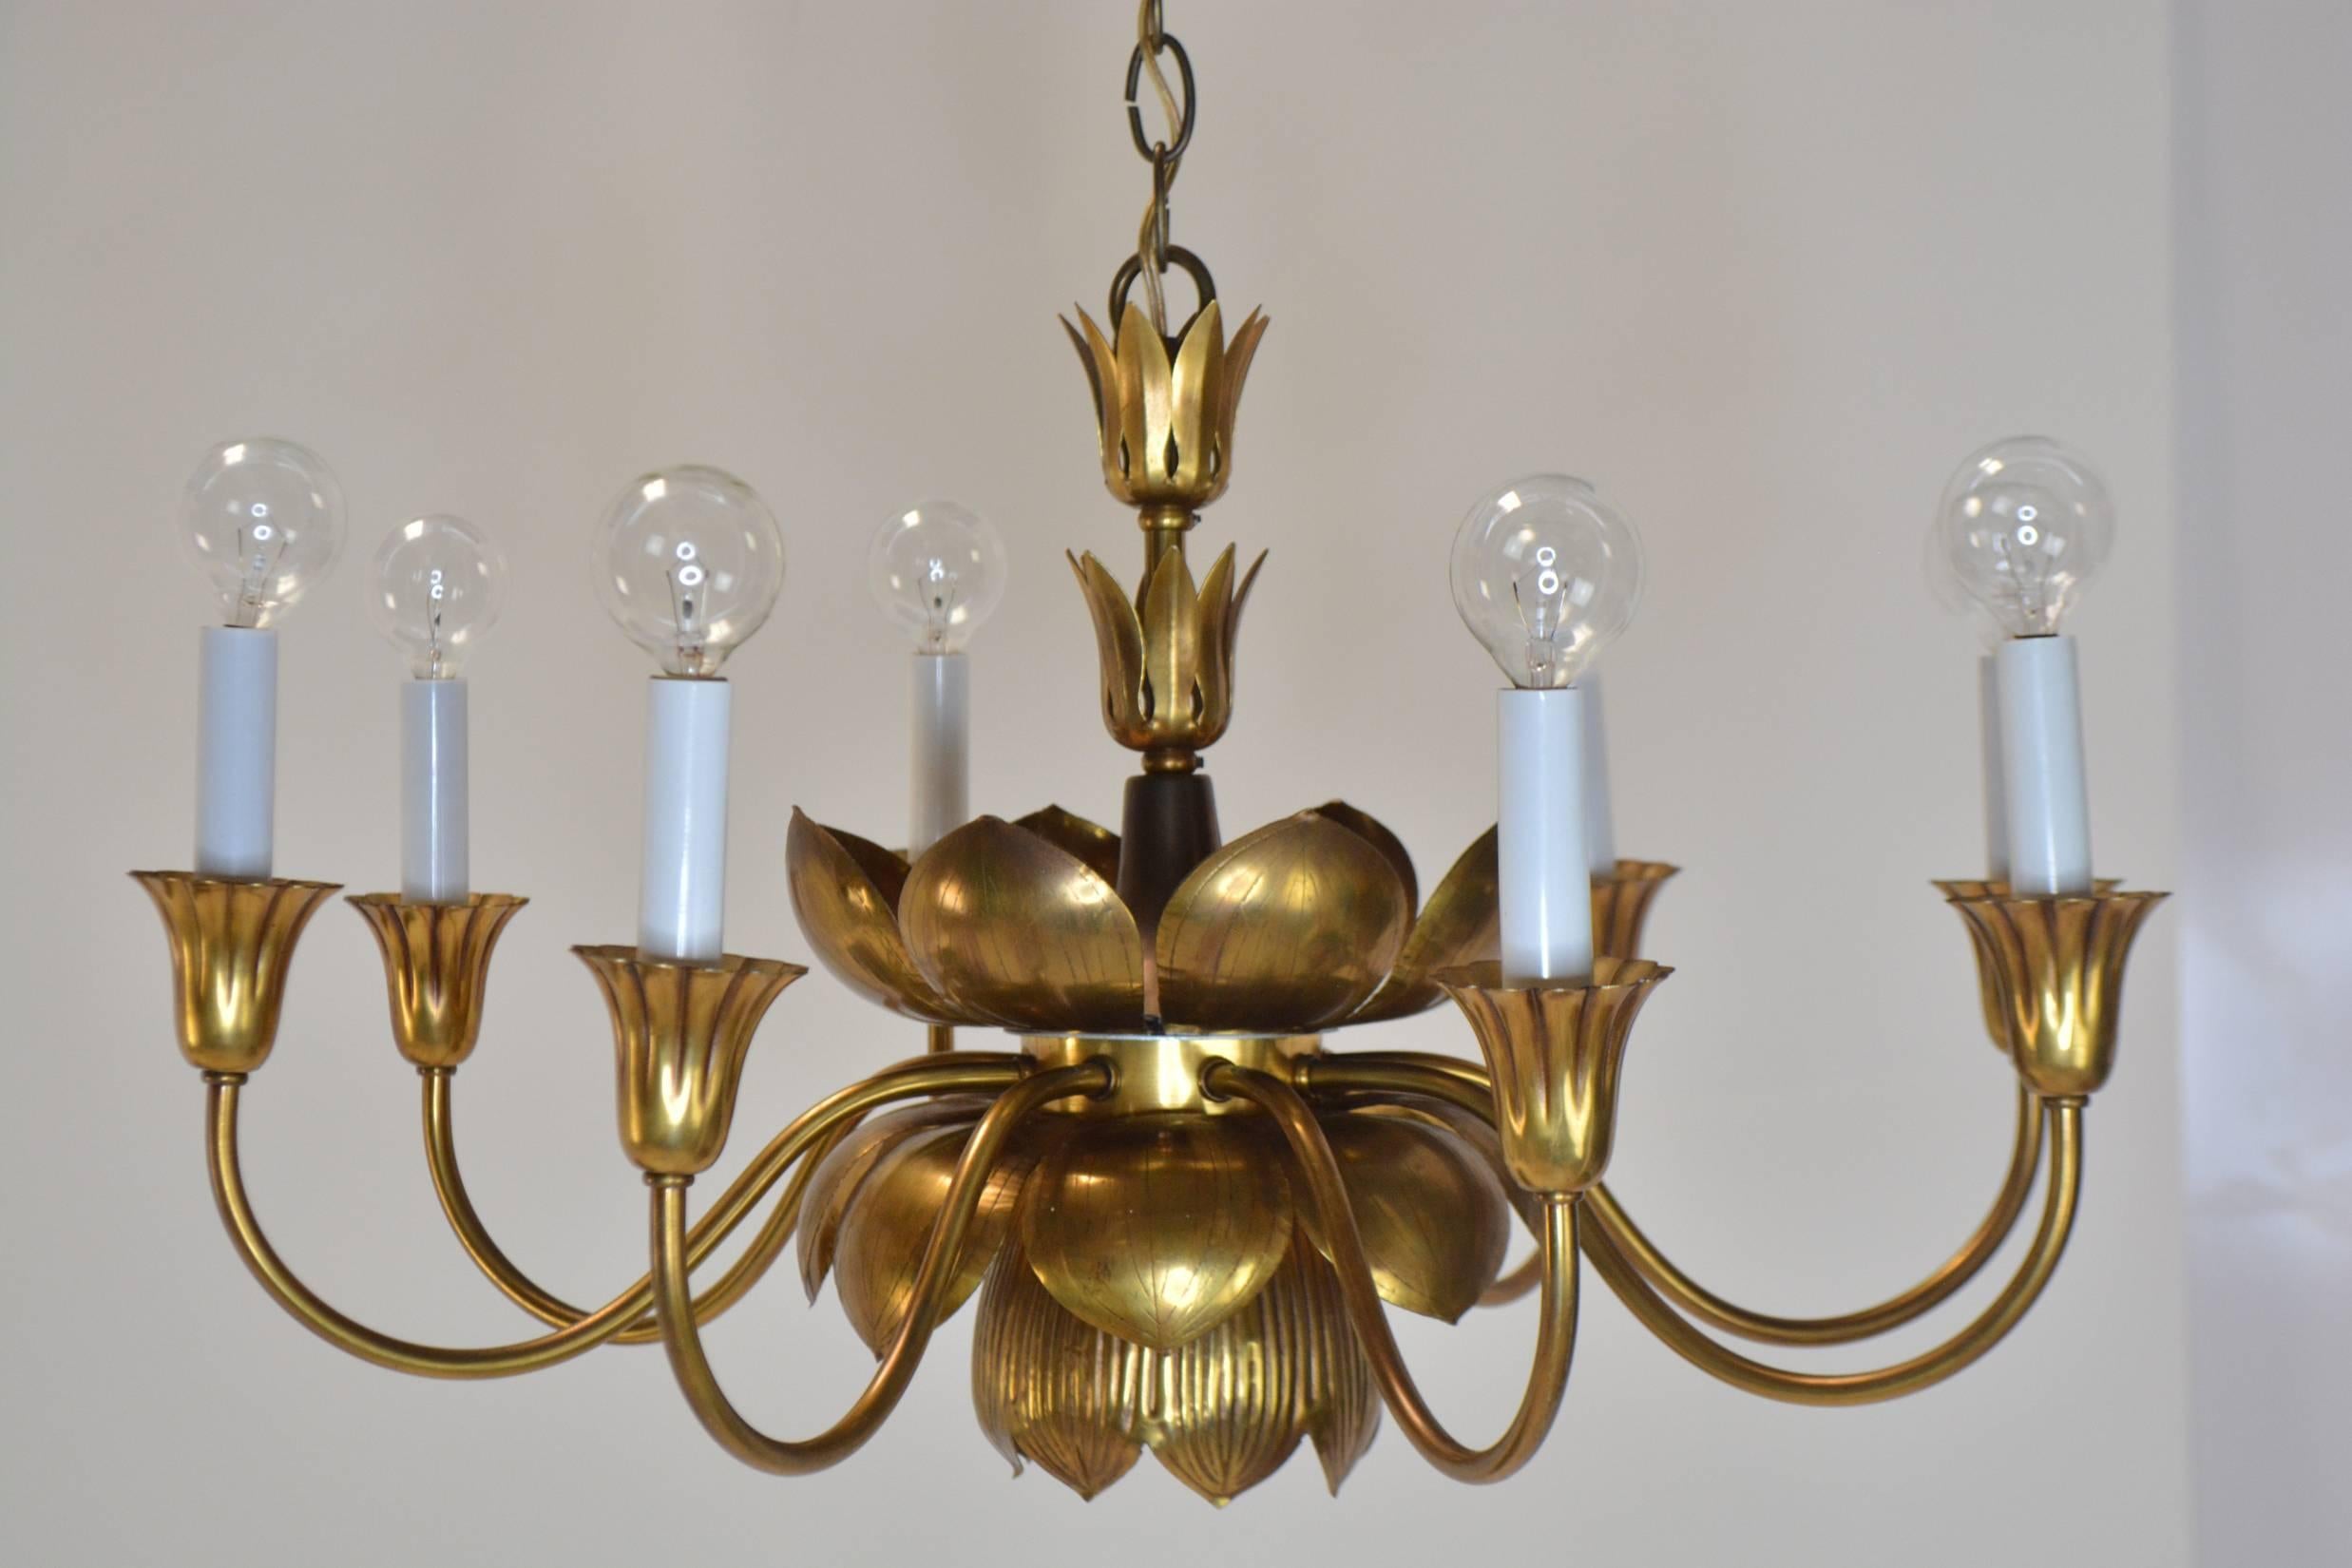 A sculptural Lotus form chandelier by Feldman Company. Six arms and sockets hold 25 W candelabra base bulbs, with a downlight in the central lotus flower. Rewired with new sockets.